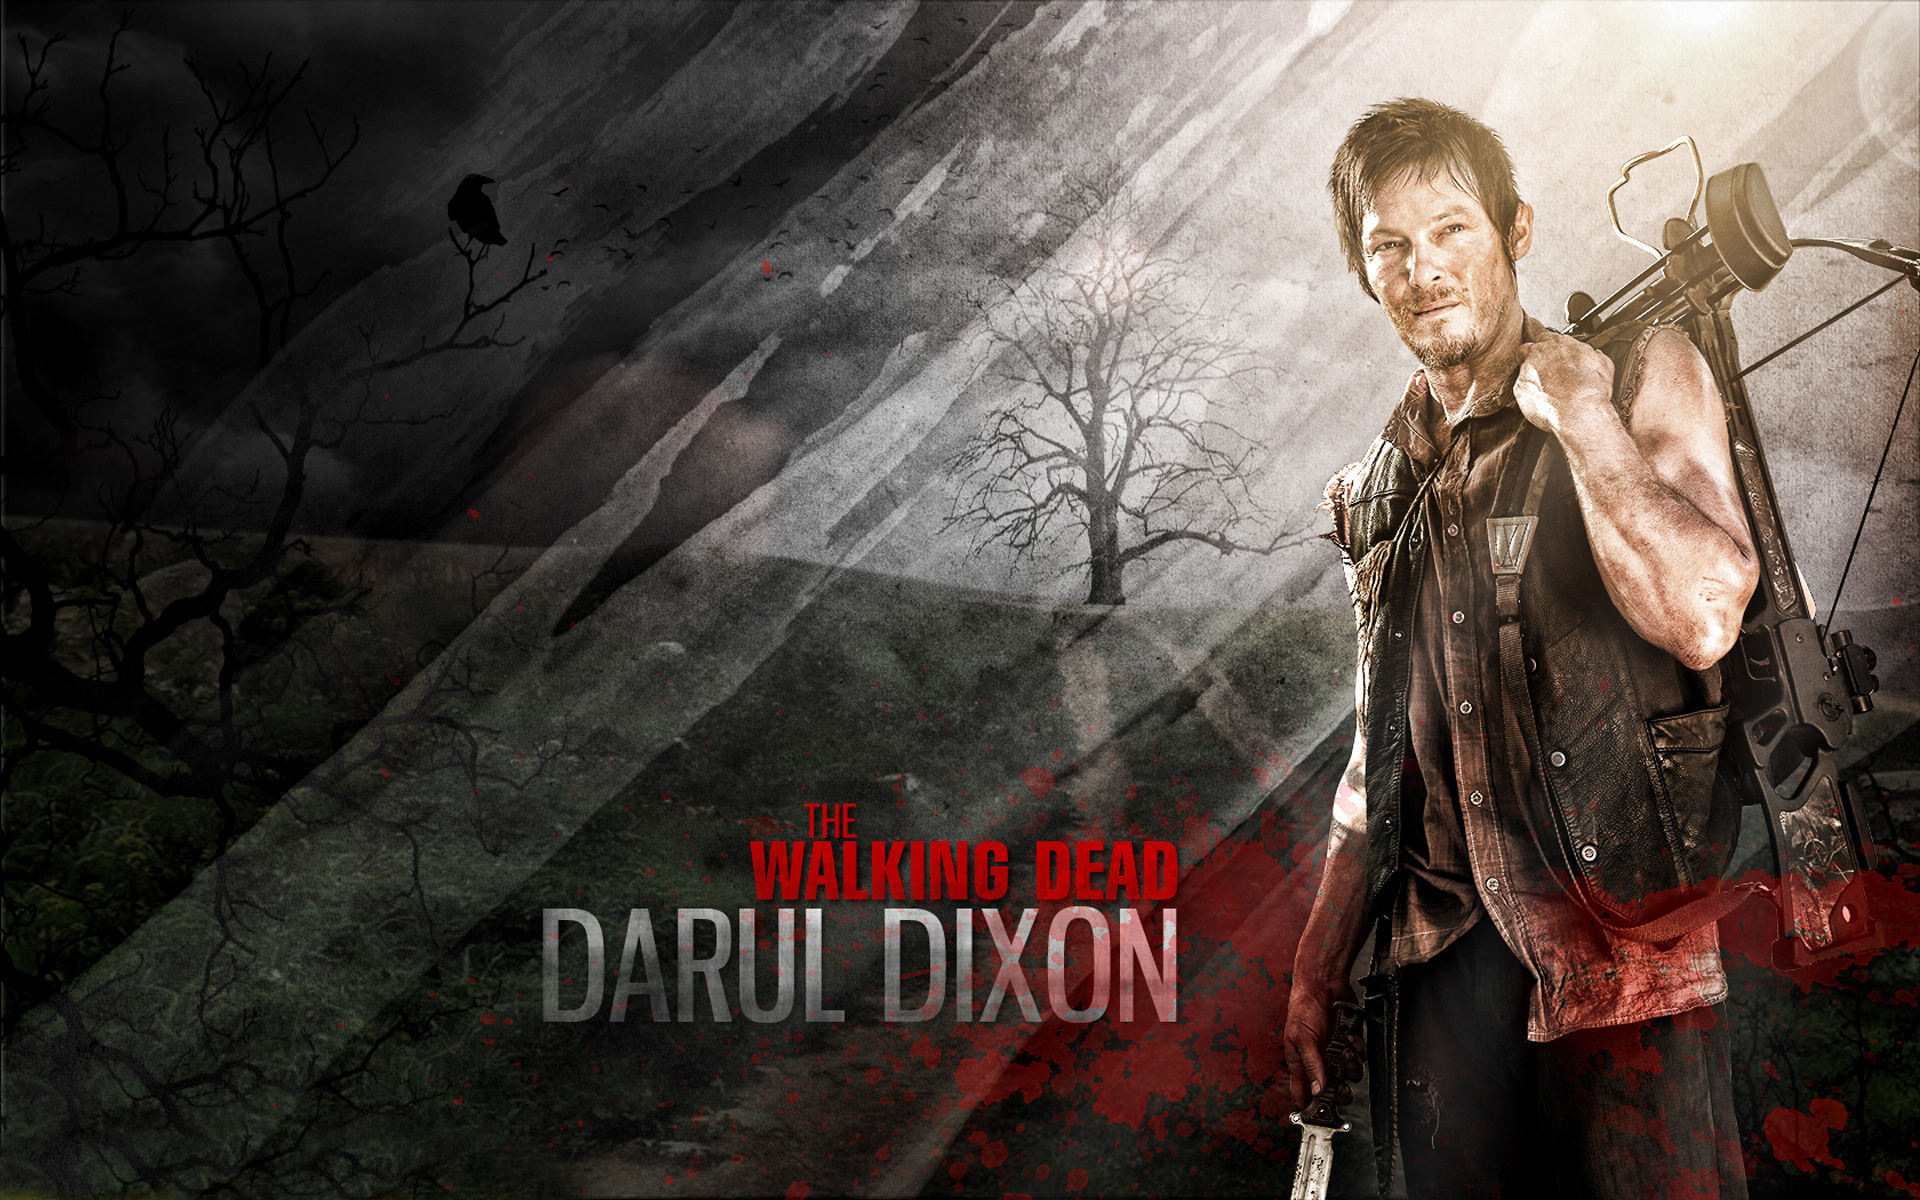 the walking dead | wallpapers55.com - Best Wallpapers for PCs ...